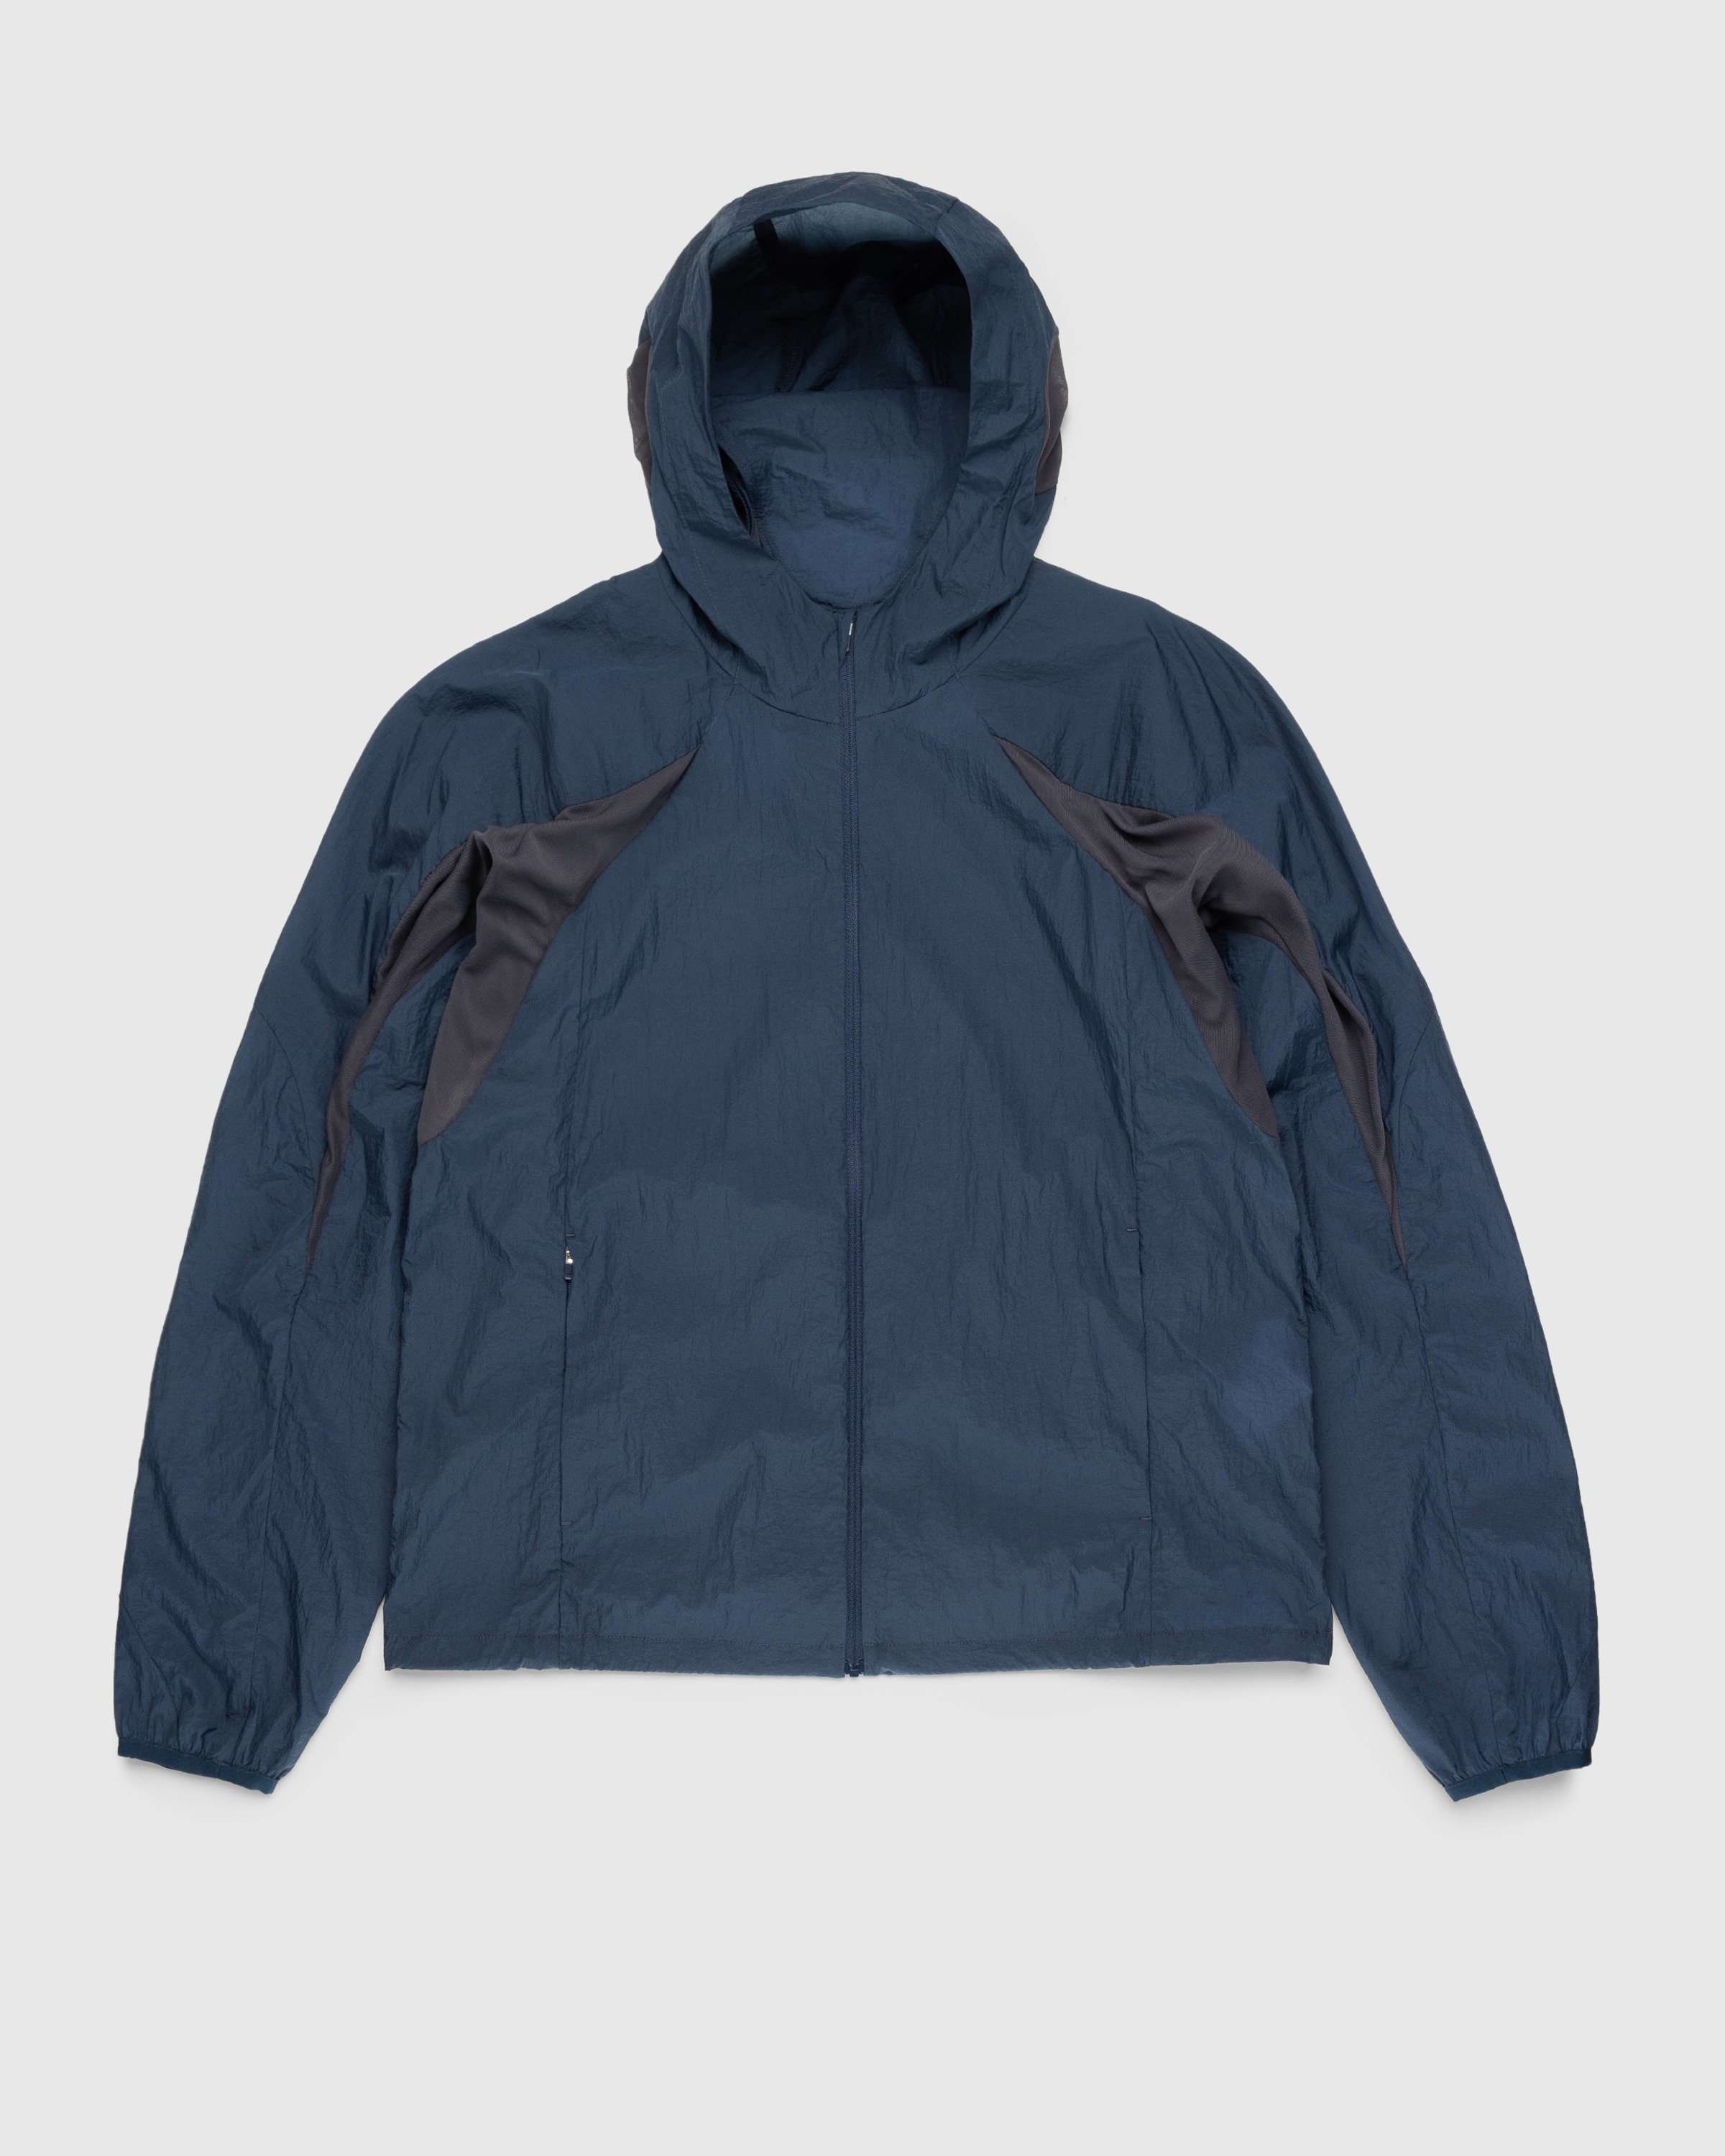 Post Archive Faction (PAF) – 5.0+ Technical Jacket Right